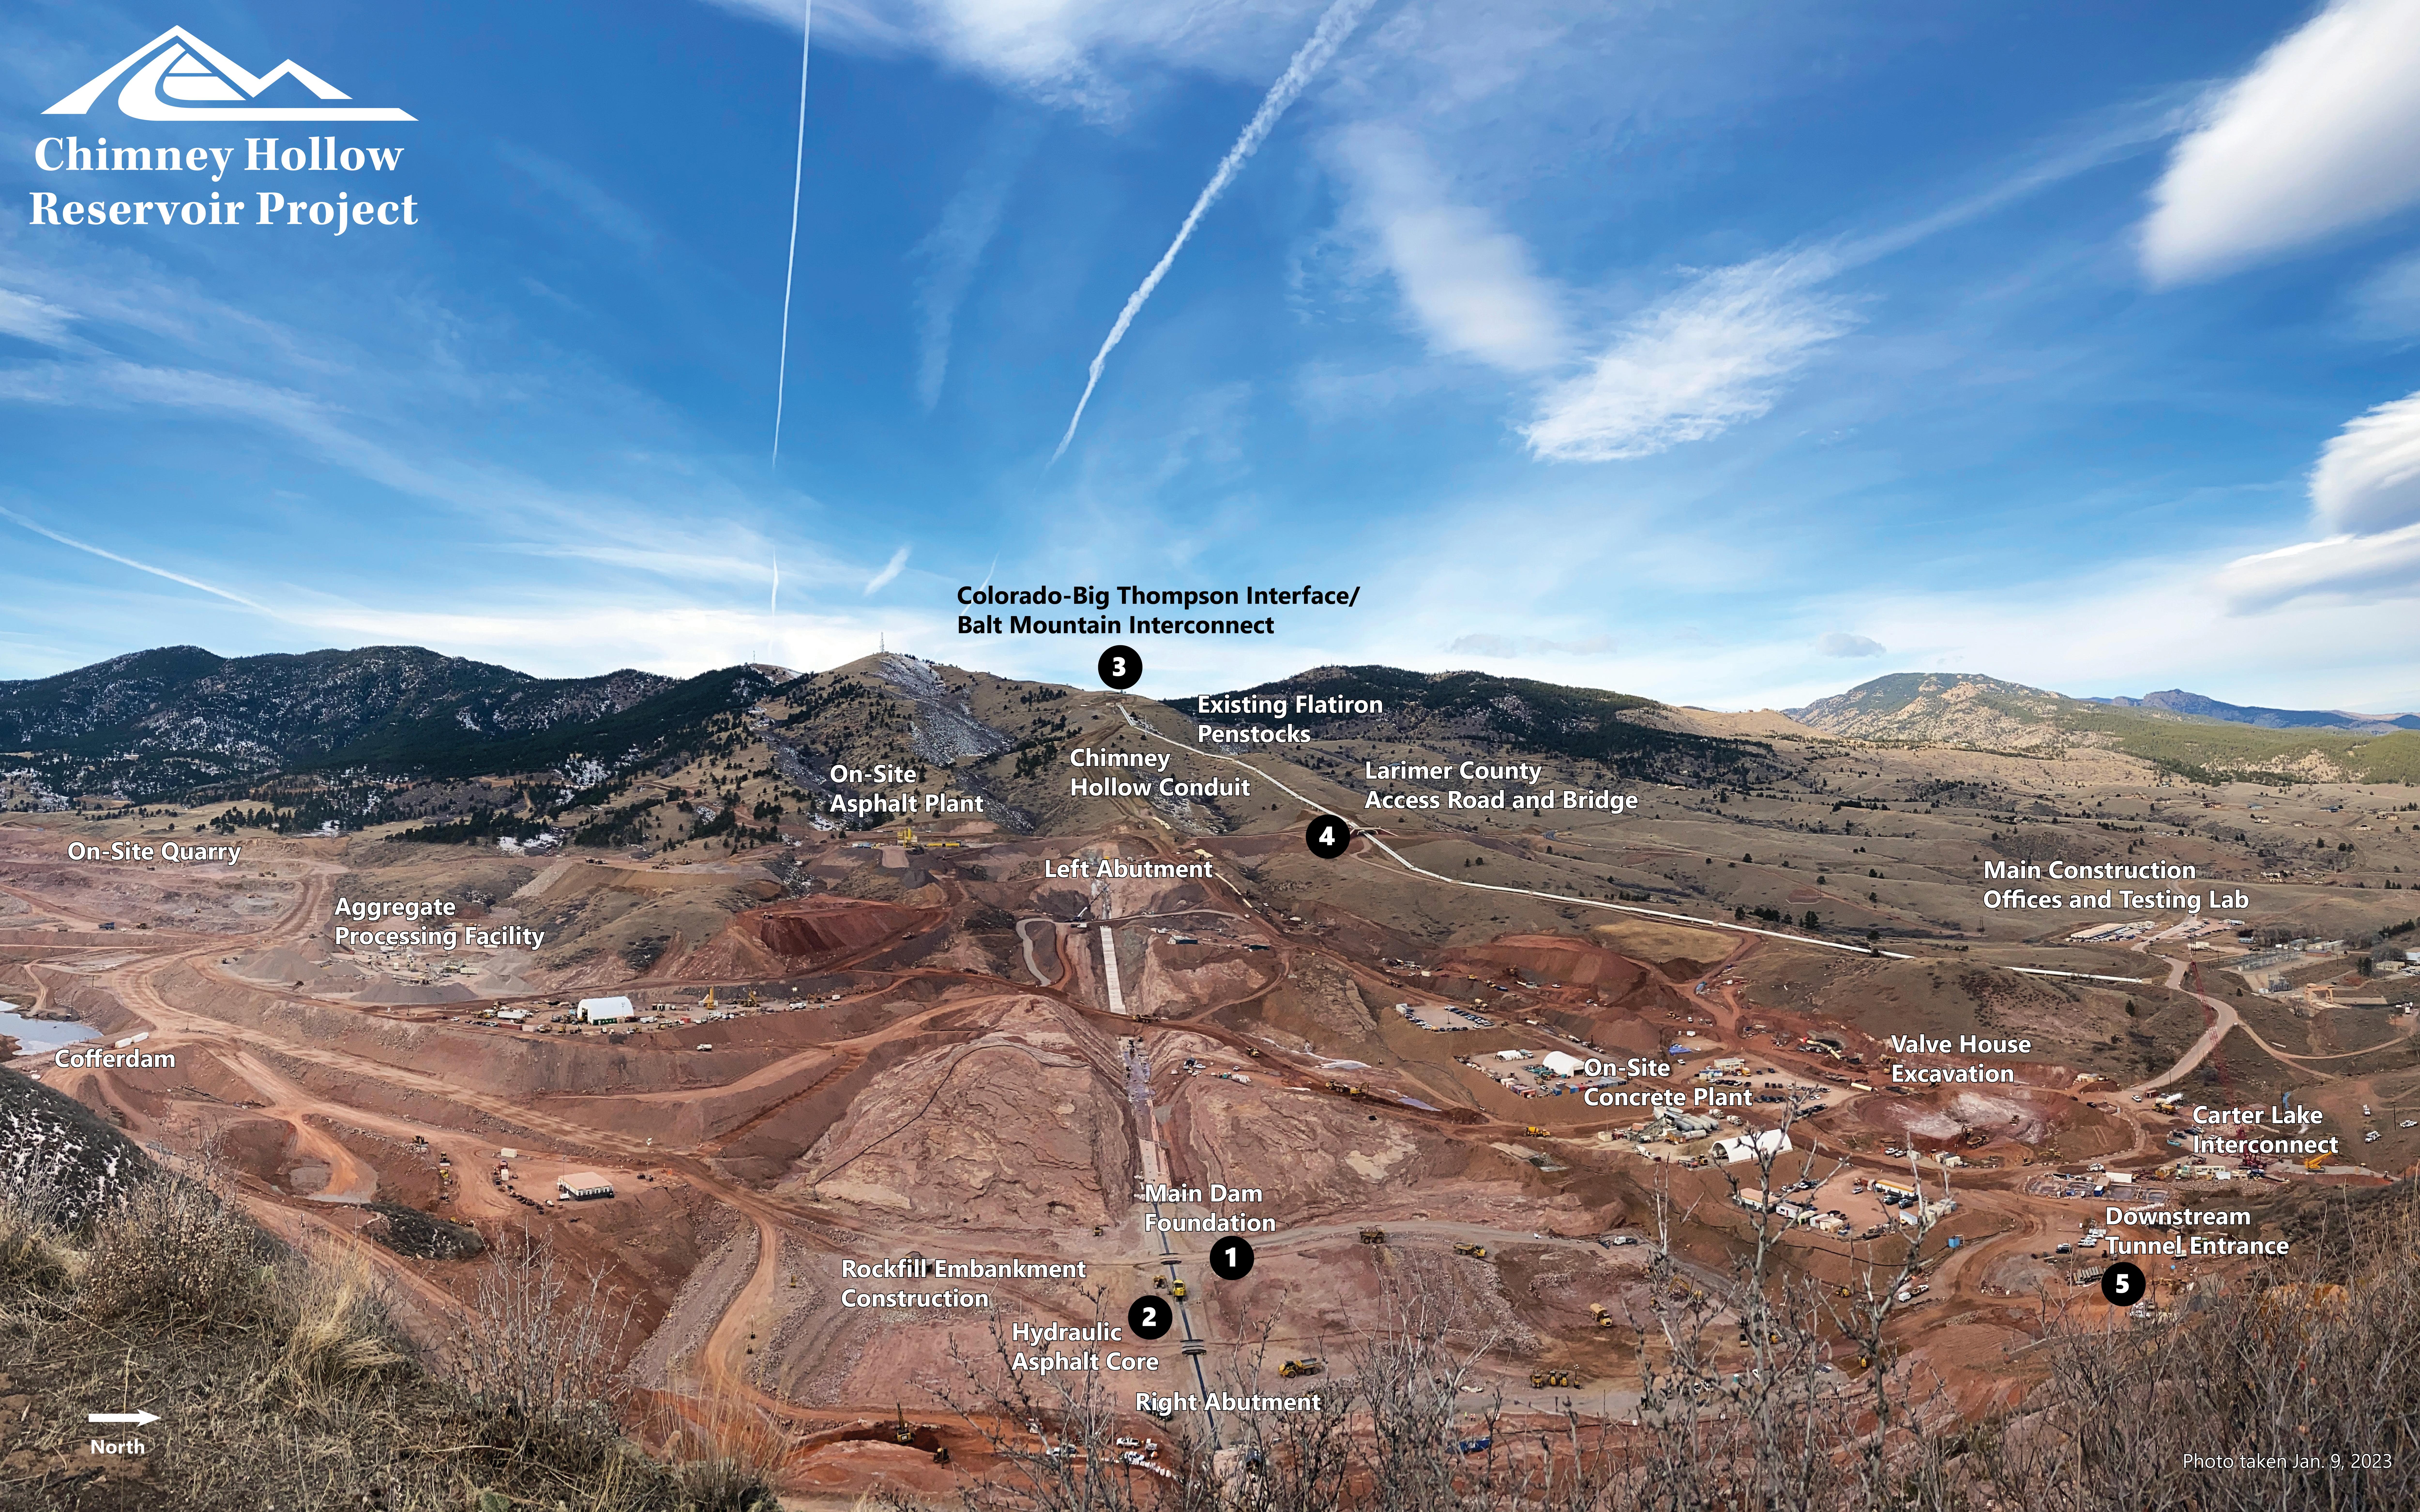 Aerial photo of the Chimney Hollow construction site with labels of various components.